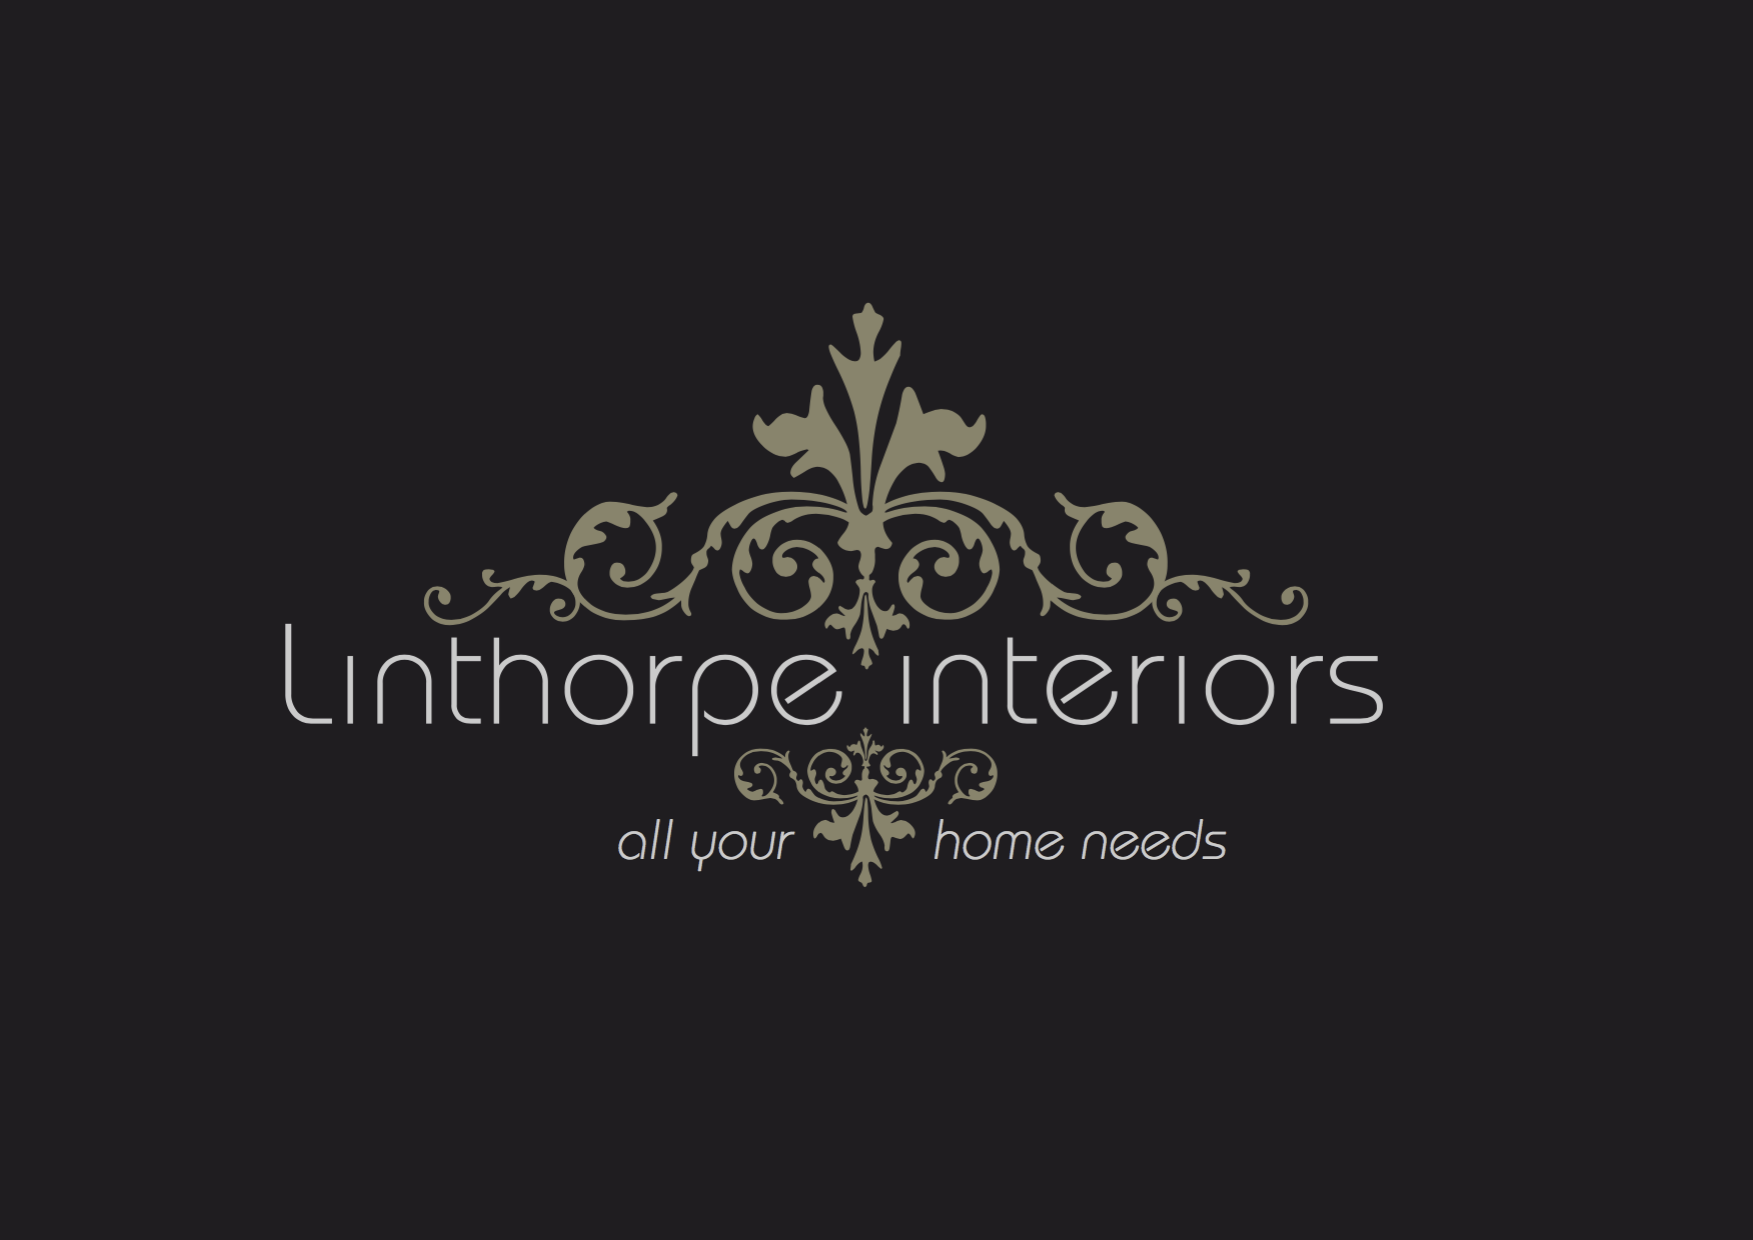 Logo of Linthorpe Interiors Home Furnishings And Housewares Retail In Stockton On Tees, Durham